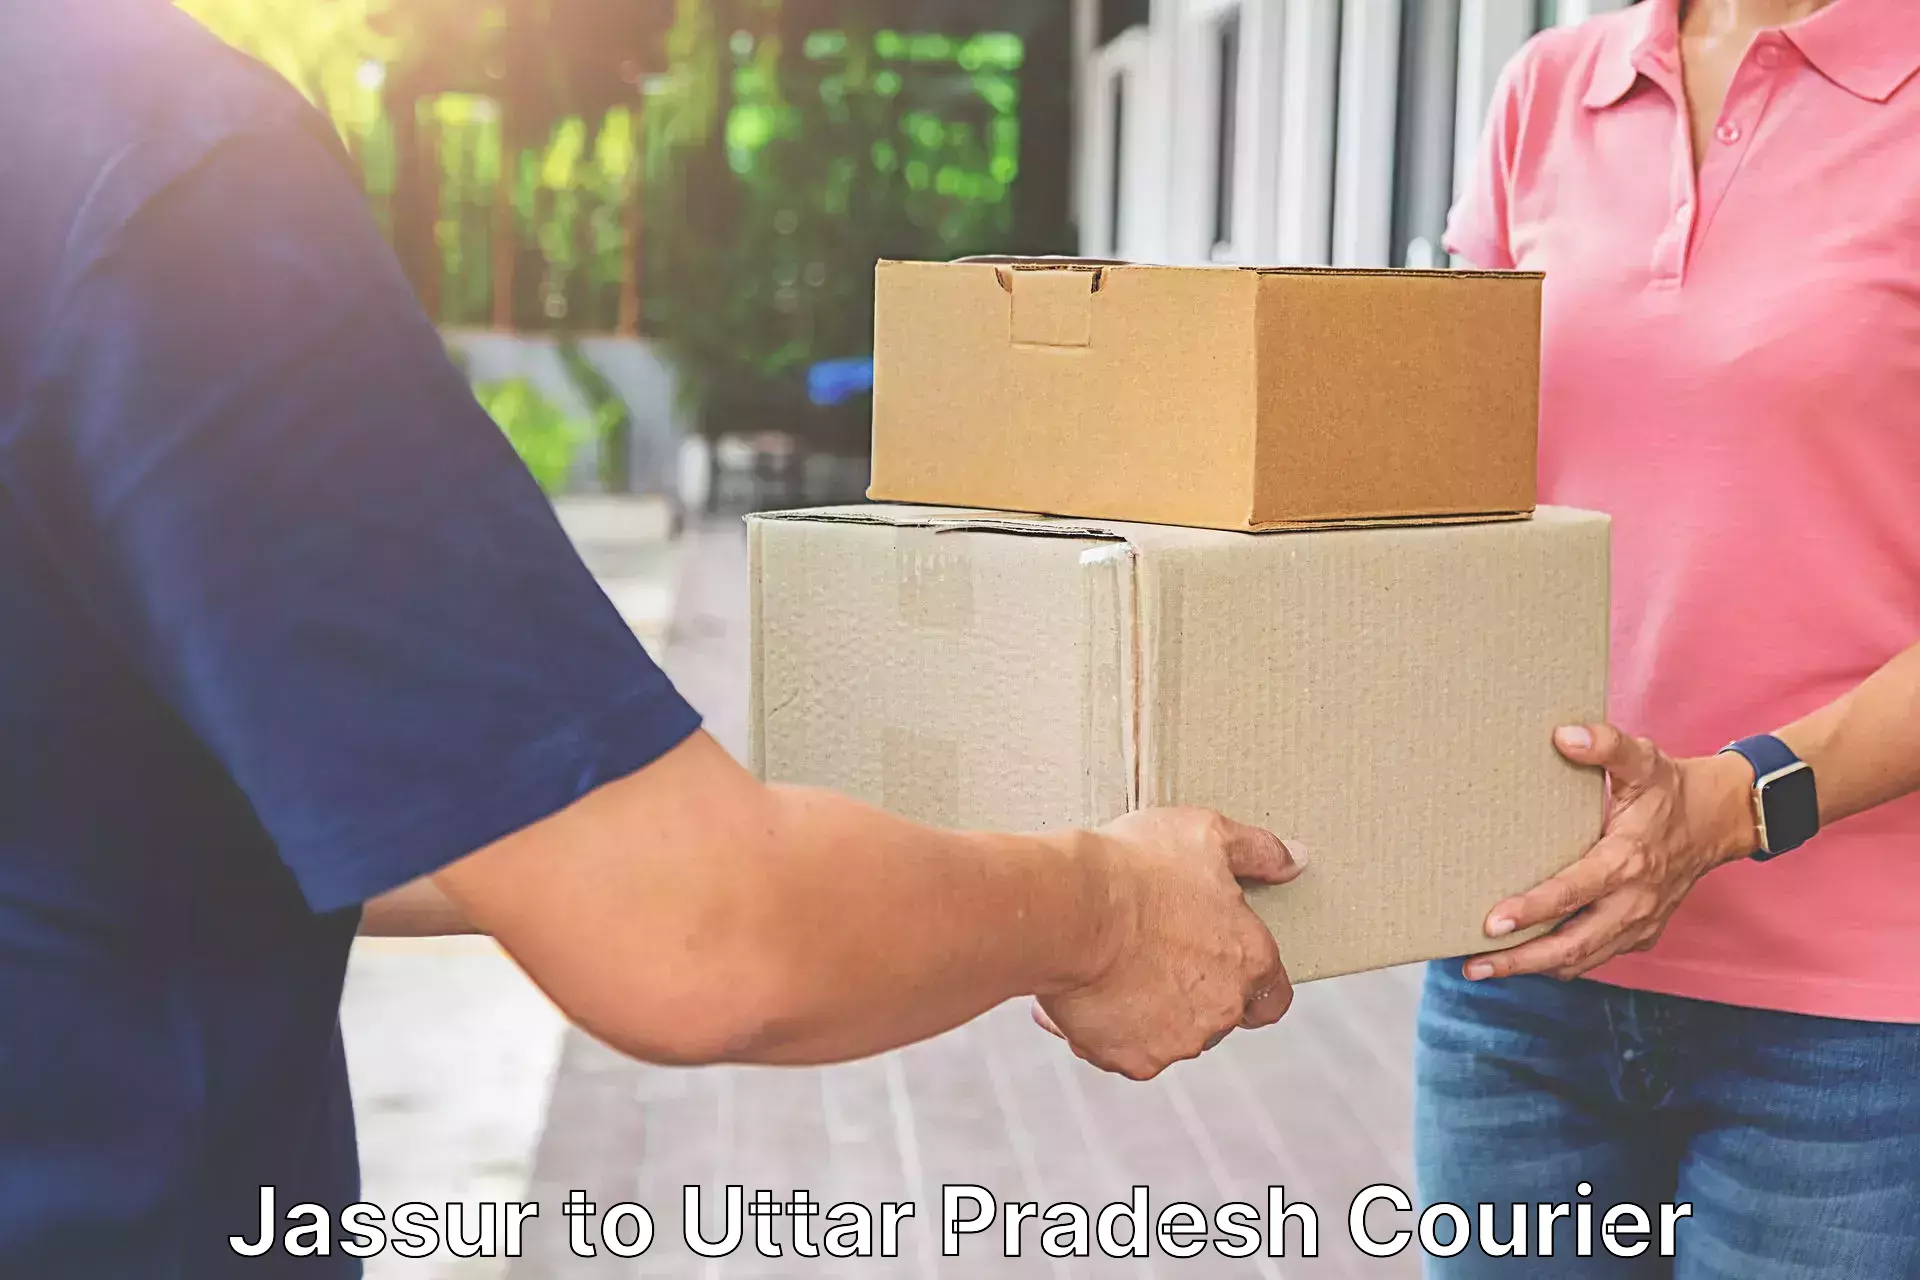 Residential courier service Jassur to Noida